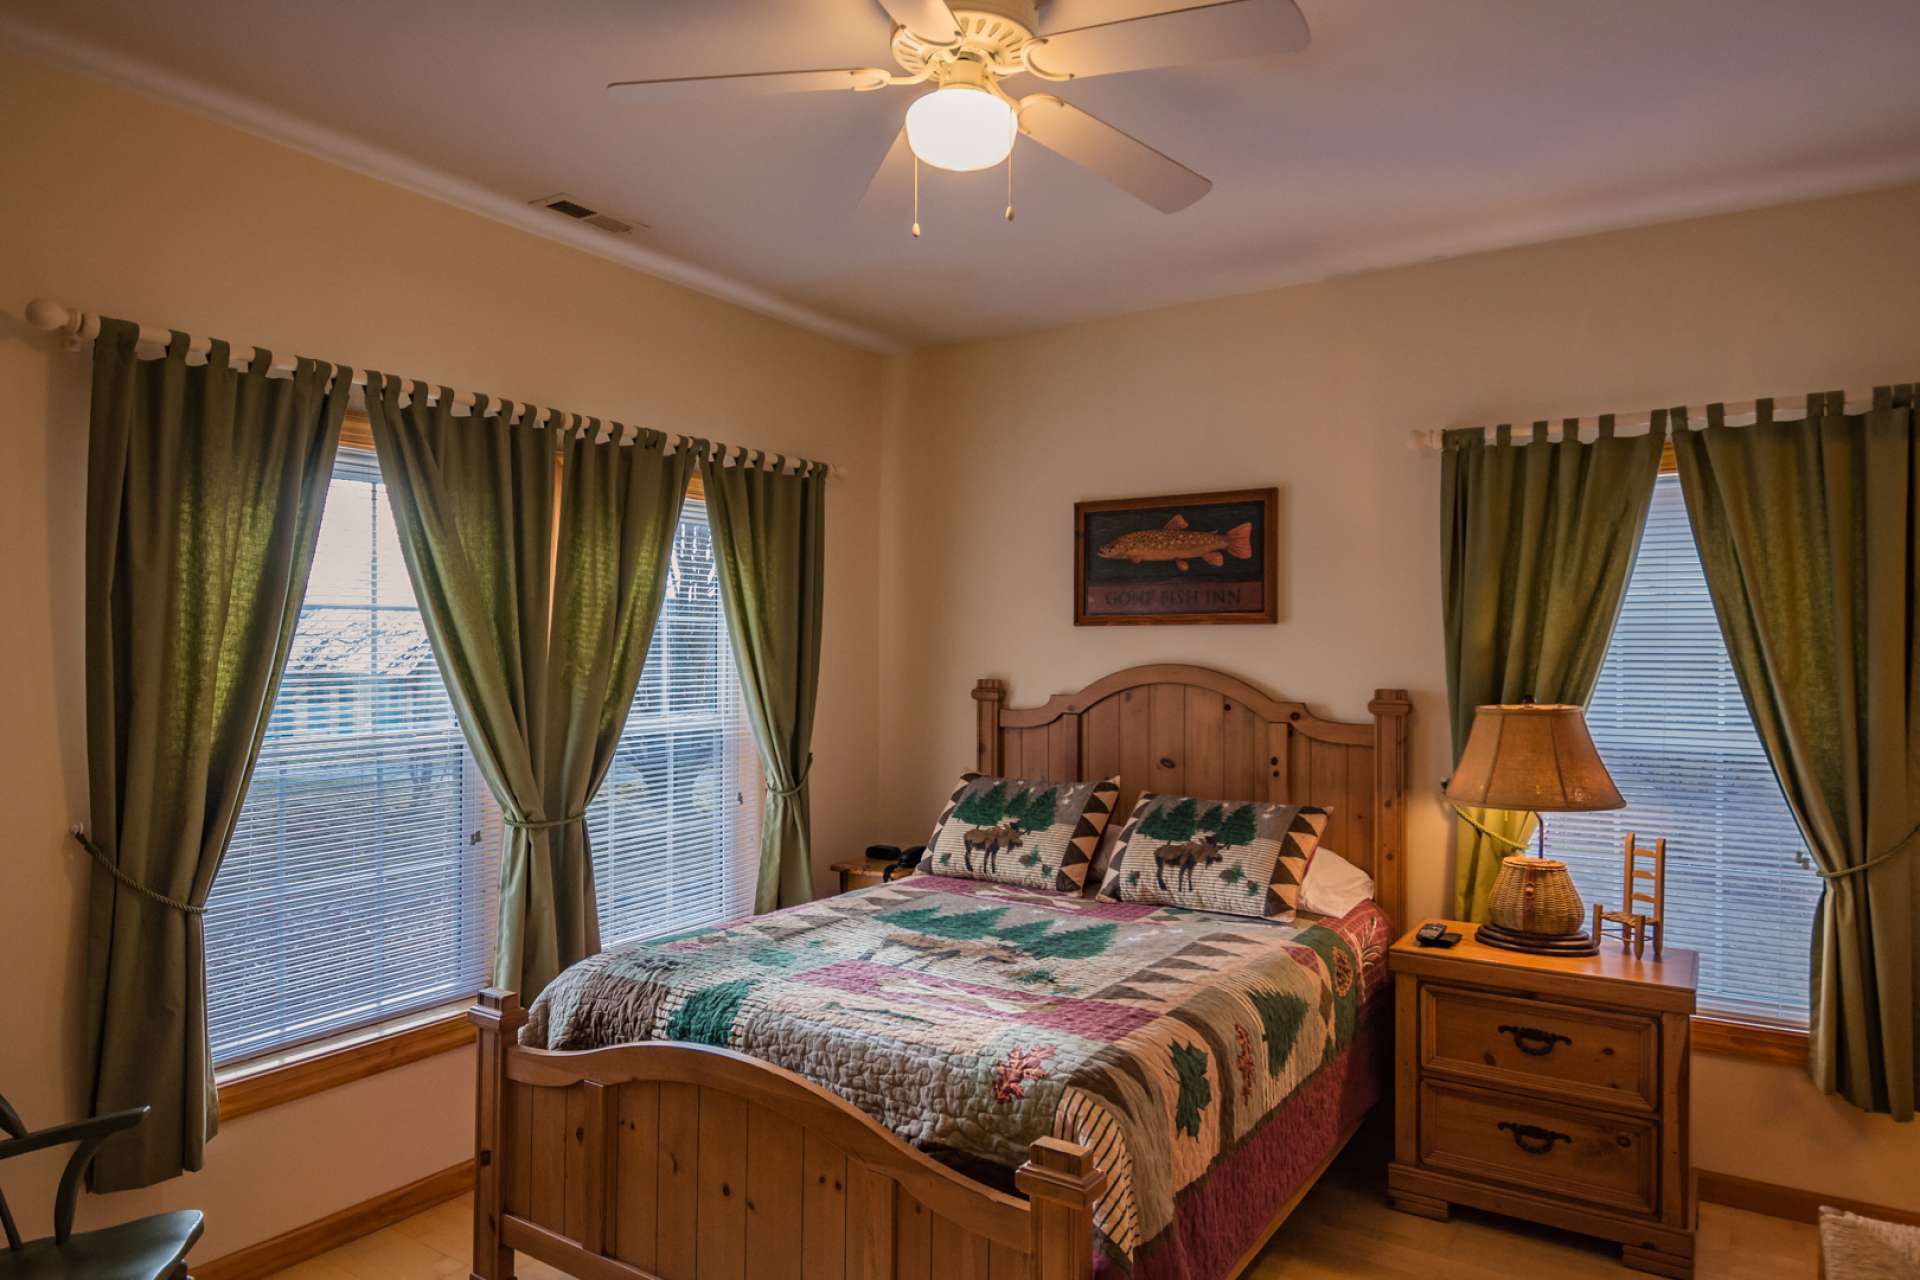 This is the second master suite. Both bedrooms are spacious and feature wood floors.